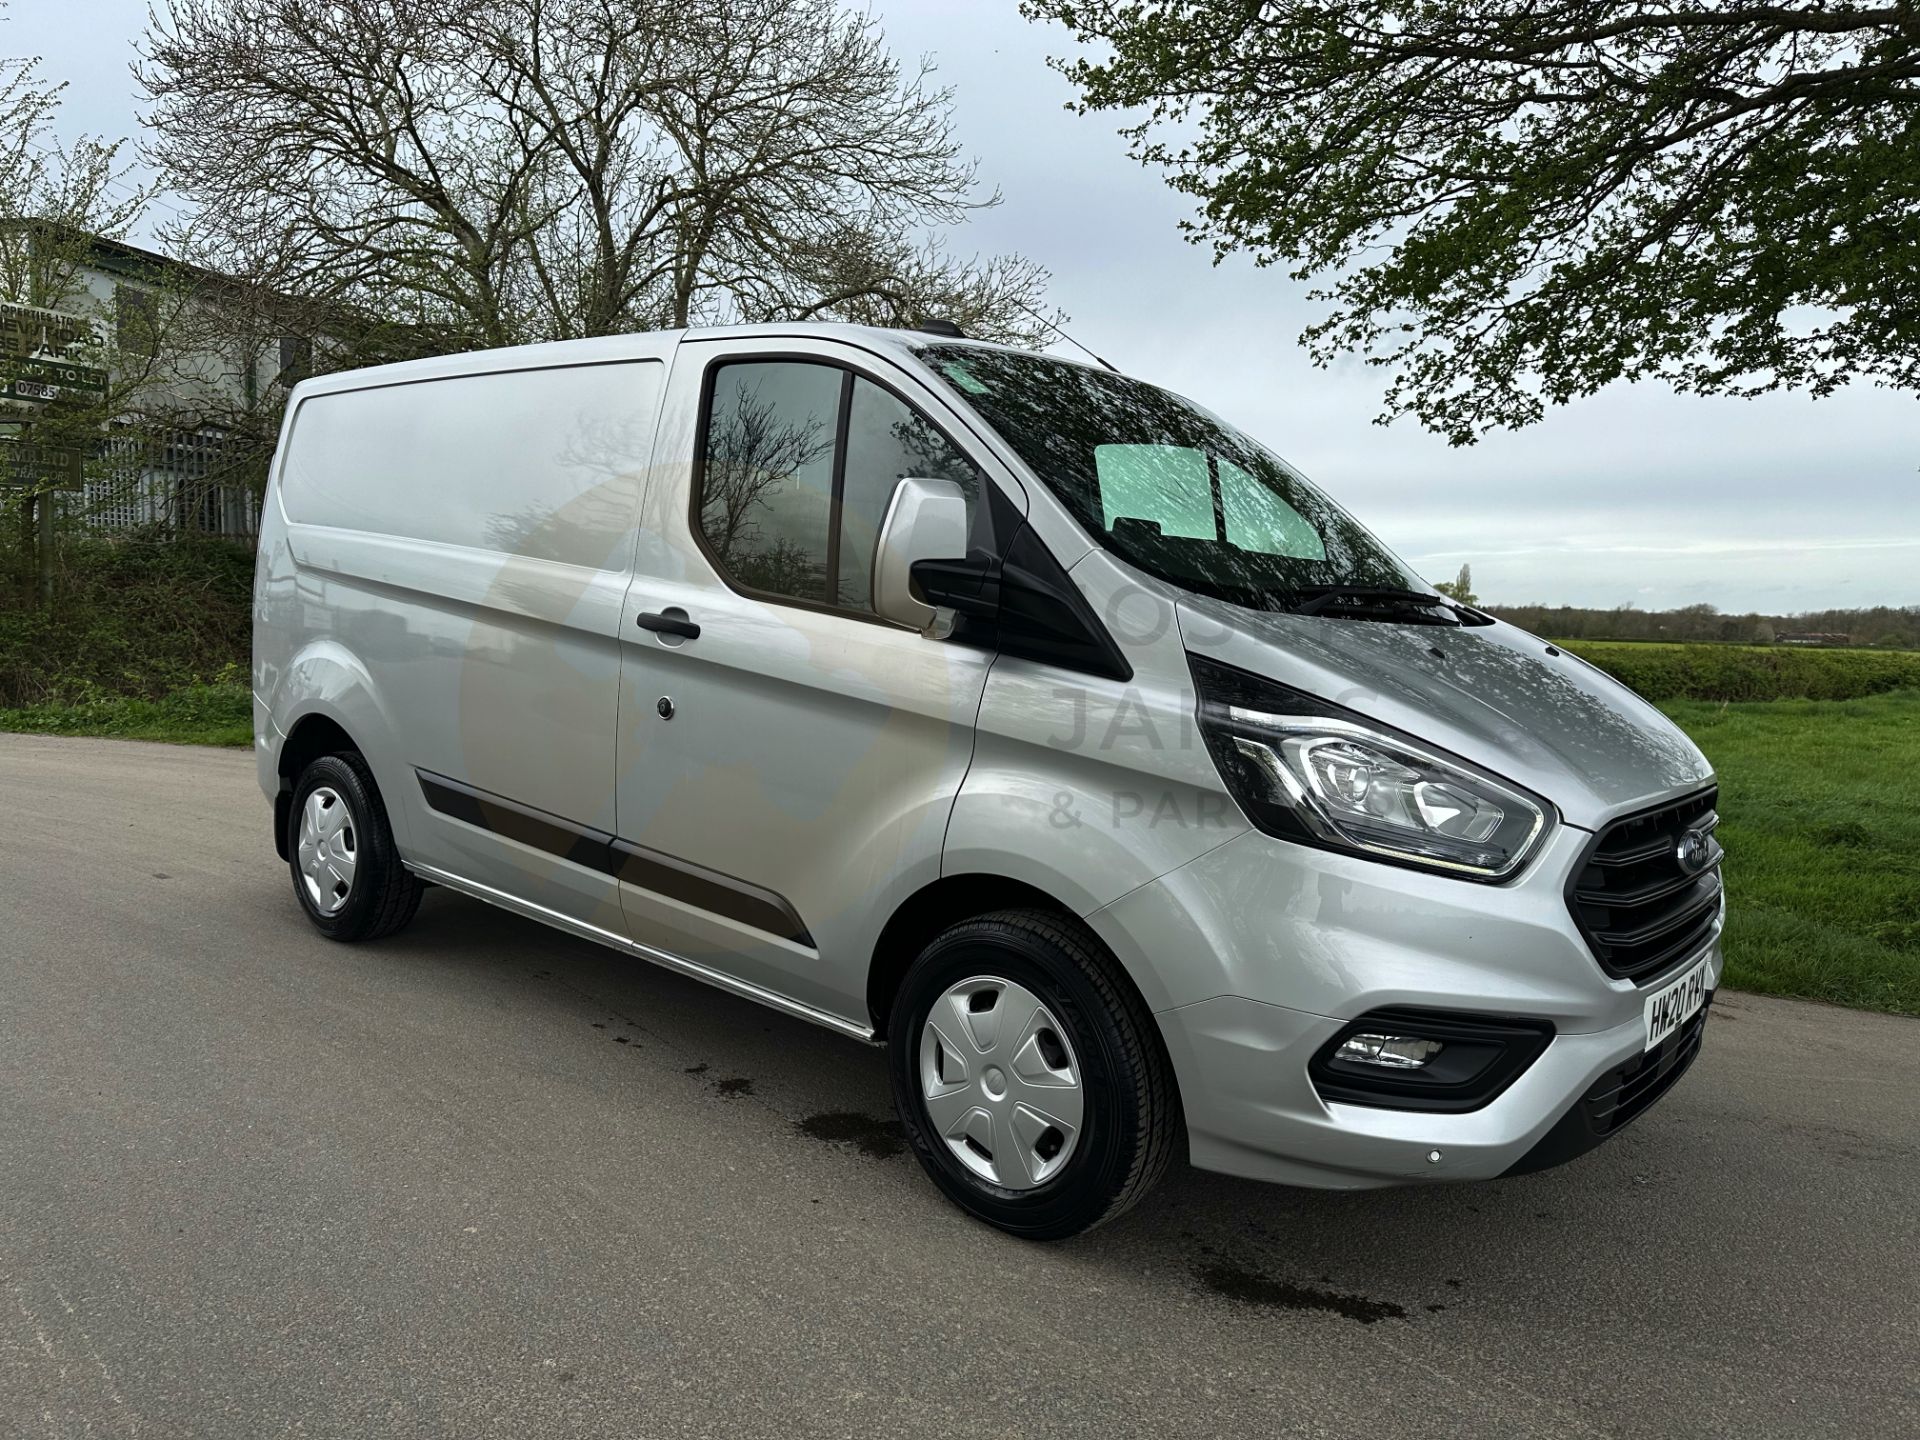 FORD TRANSIT CUSTOM "TREND" 2.0TDCI (130) 20 REG -1 OWNER- SILVER -GREAT SPEC -LOW MILEAGE - Image 3 of 38